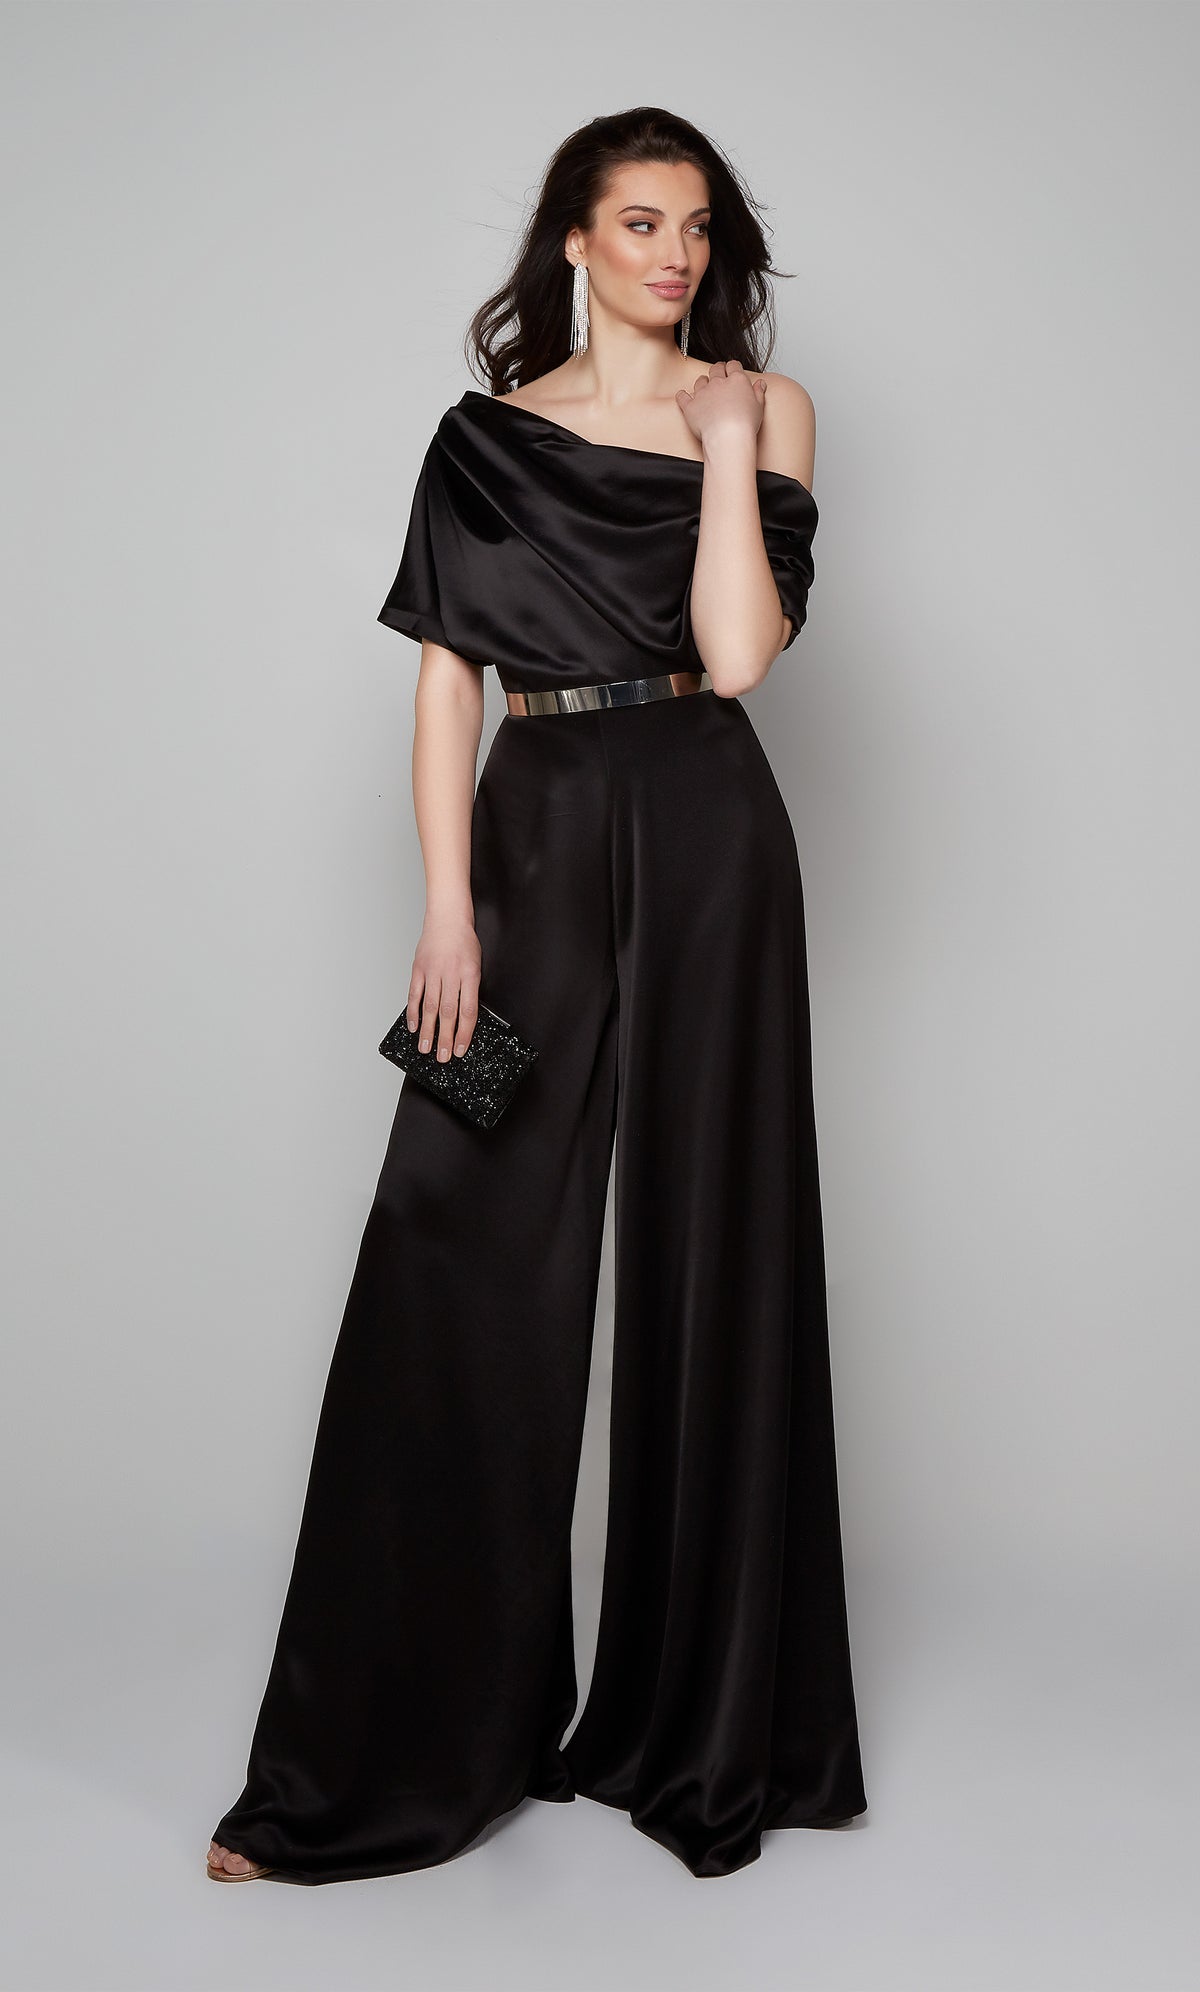 Elegant black jumpsuit with draped one shoulder bodice shown with silver belt. Belt not included with purchase.